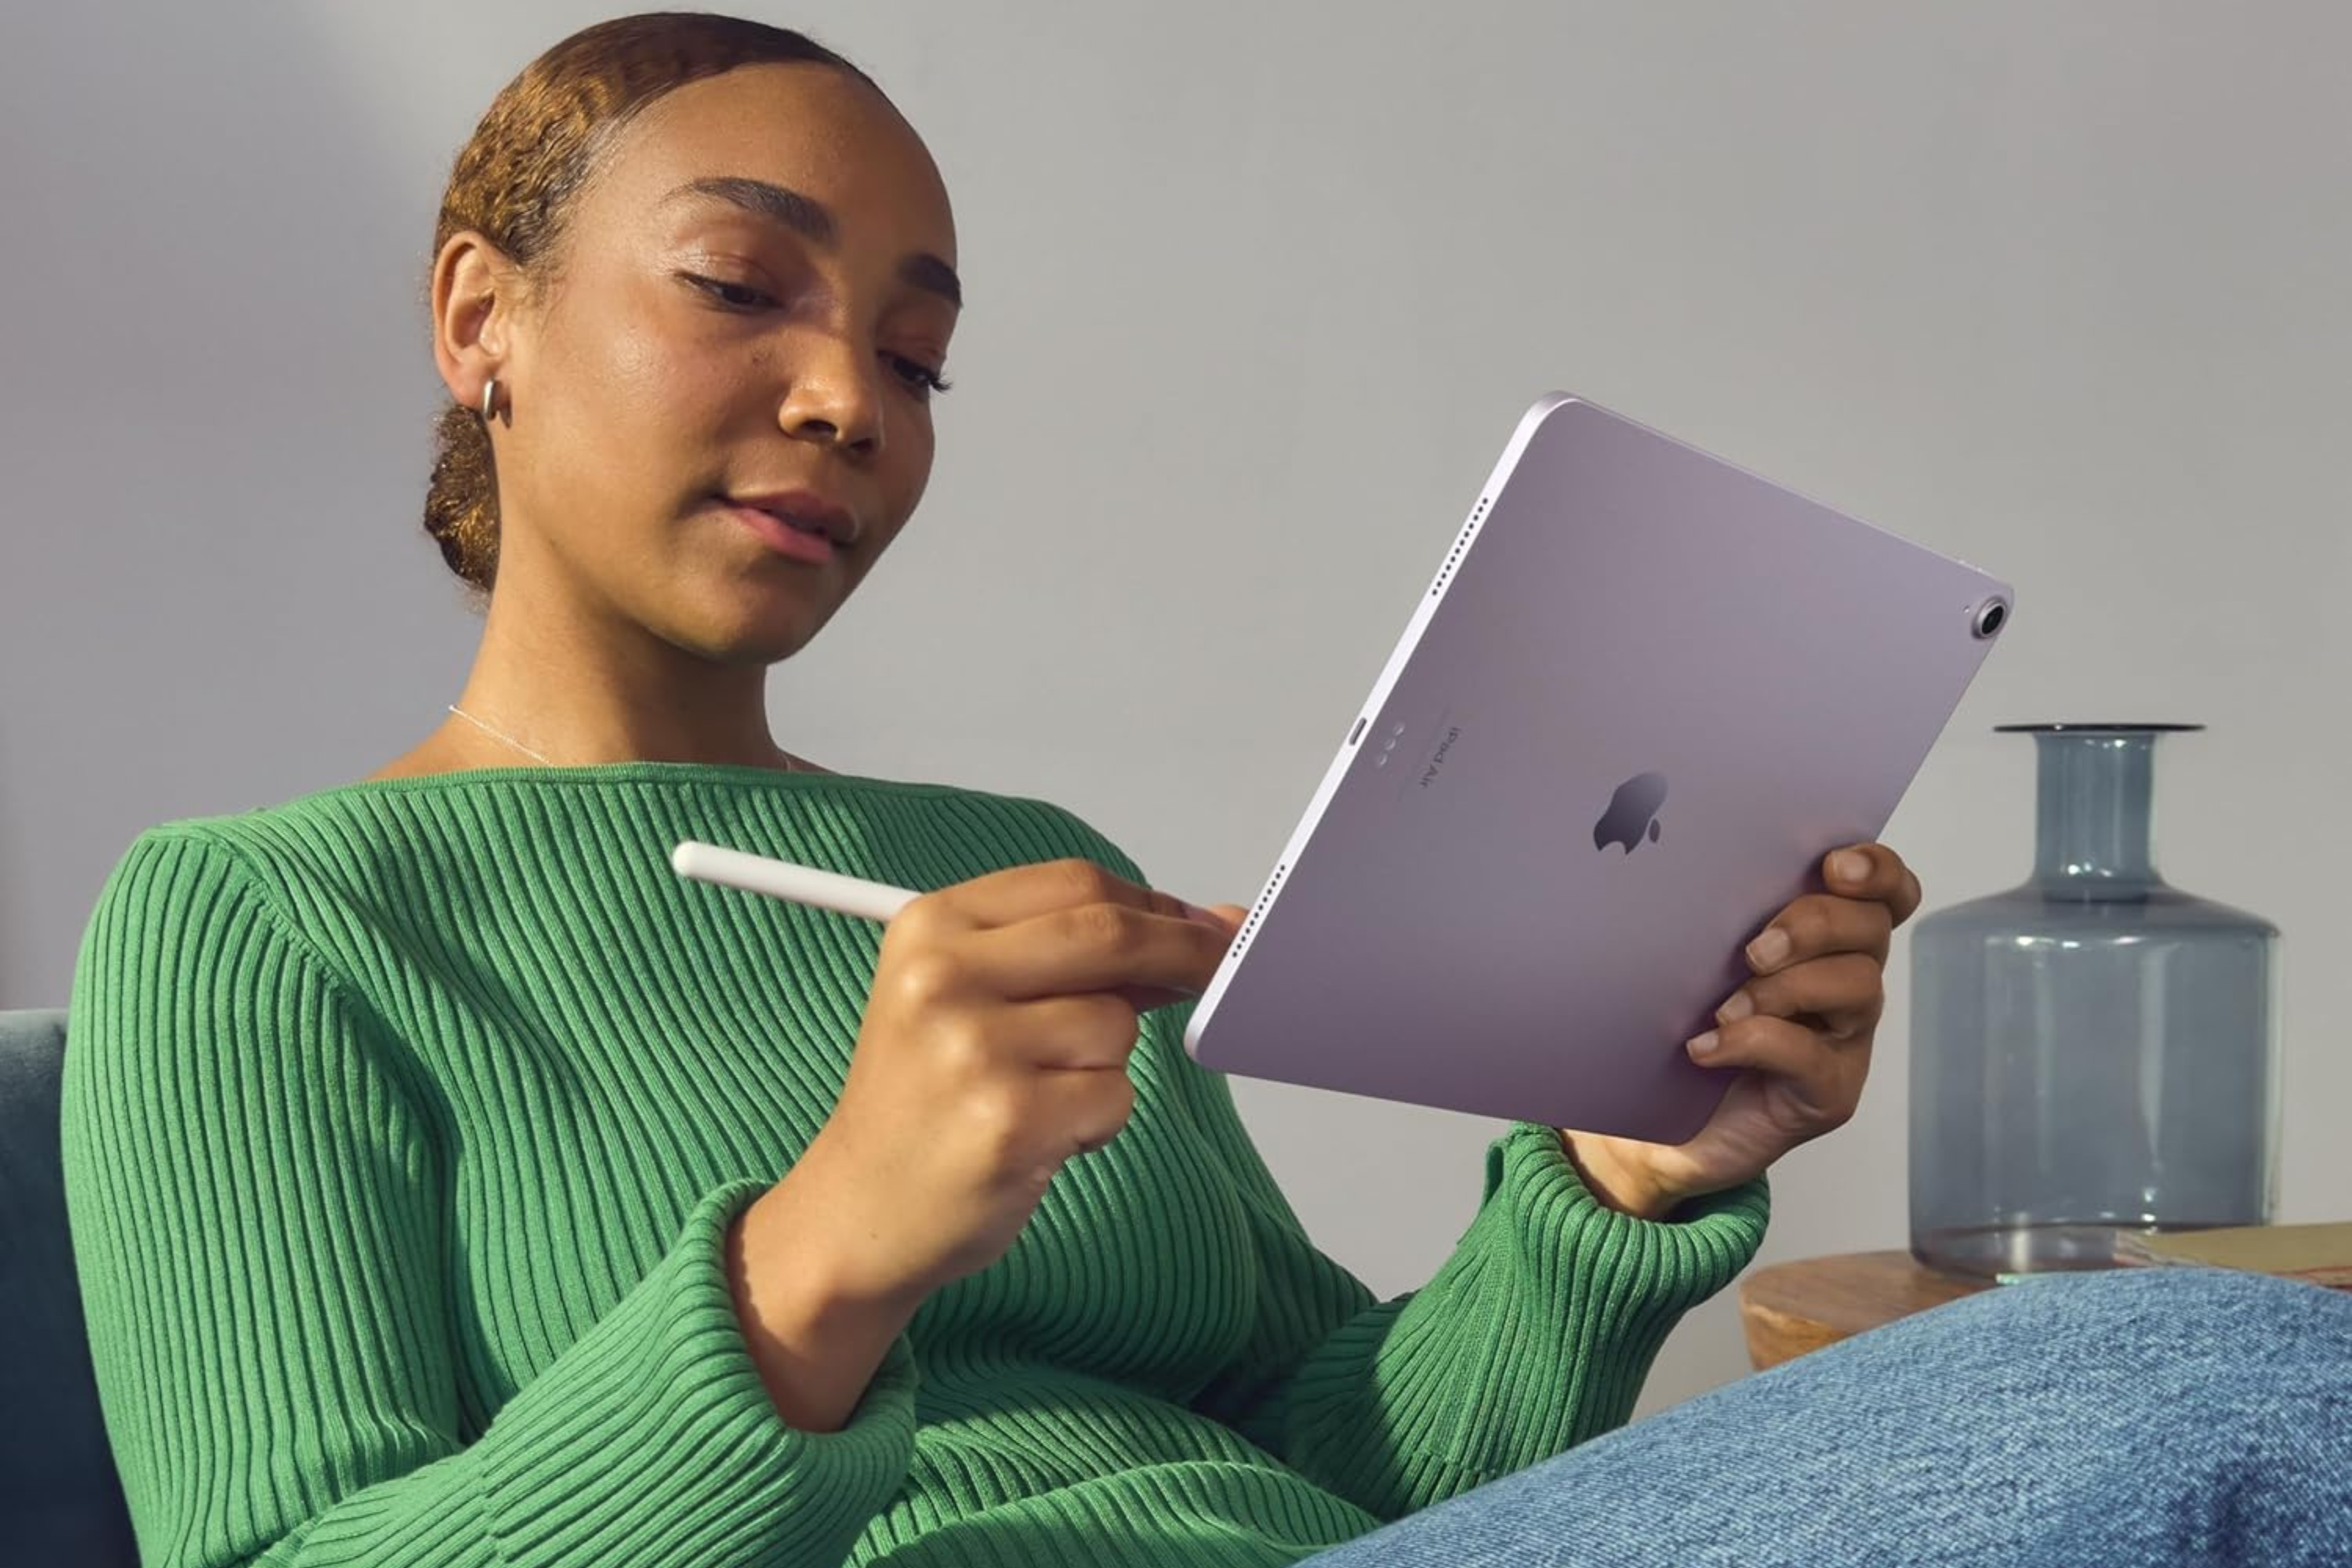 Person holding Apple iPad Air with stylus